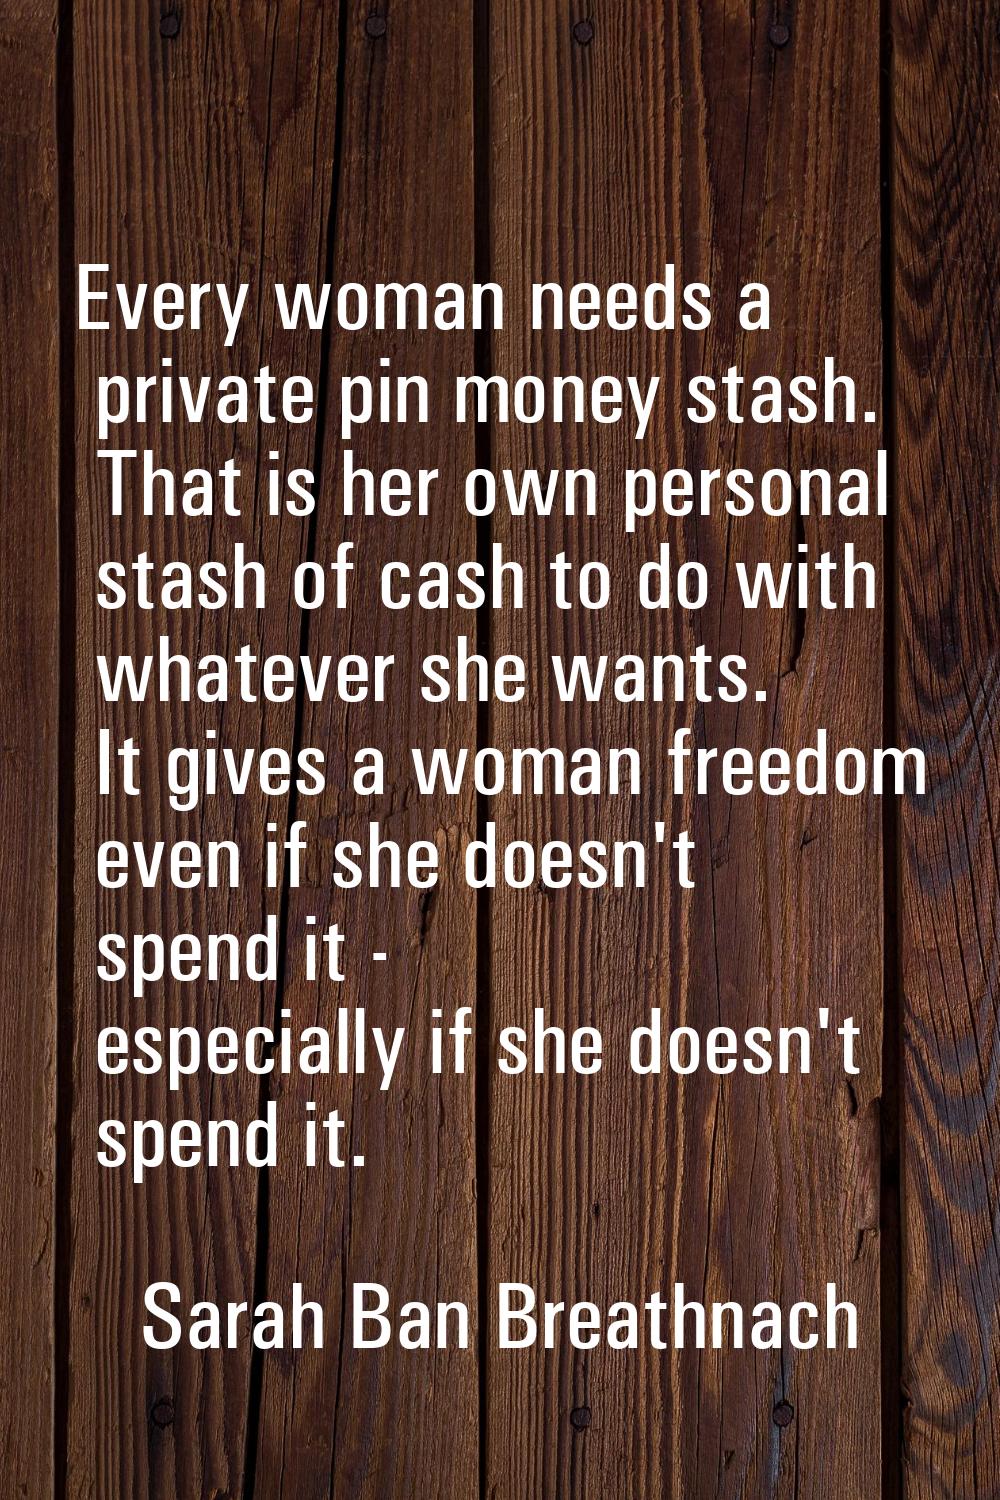 Every woman needs a private pin money stash. That is her own personal stash of cash to do with what